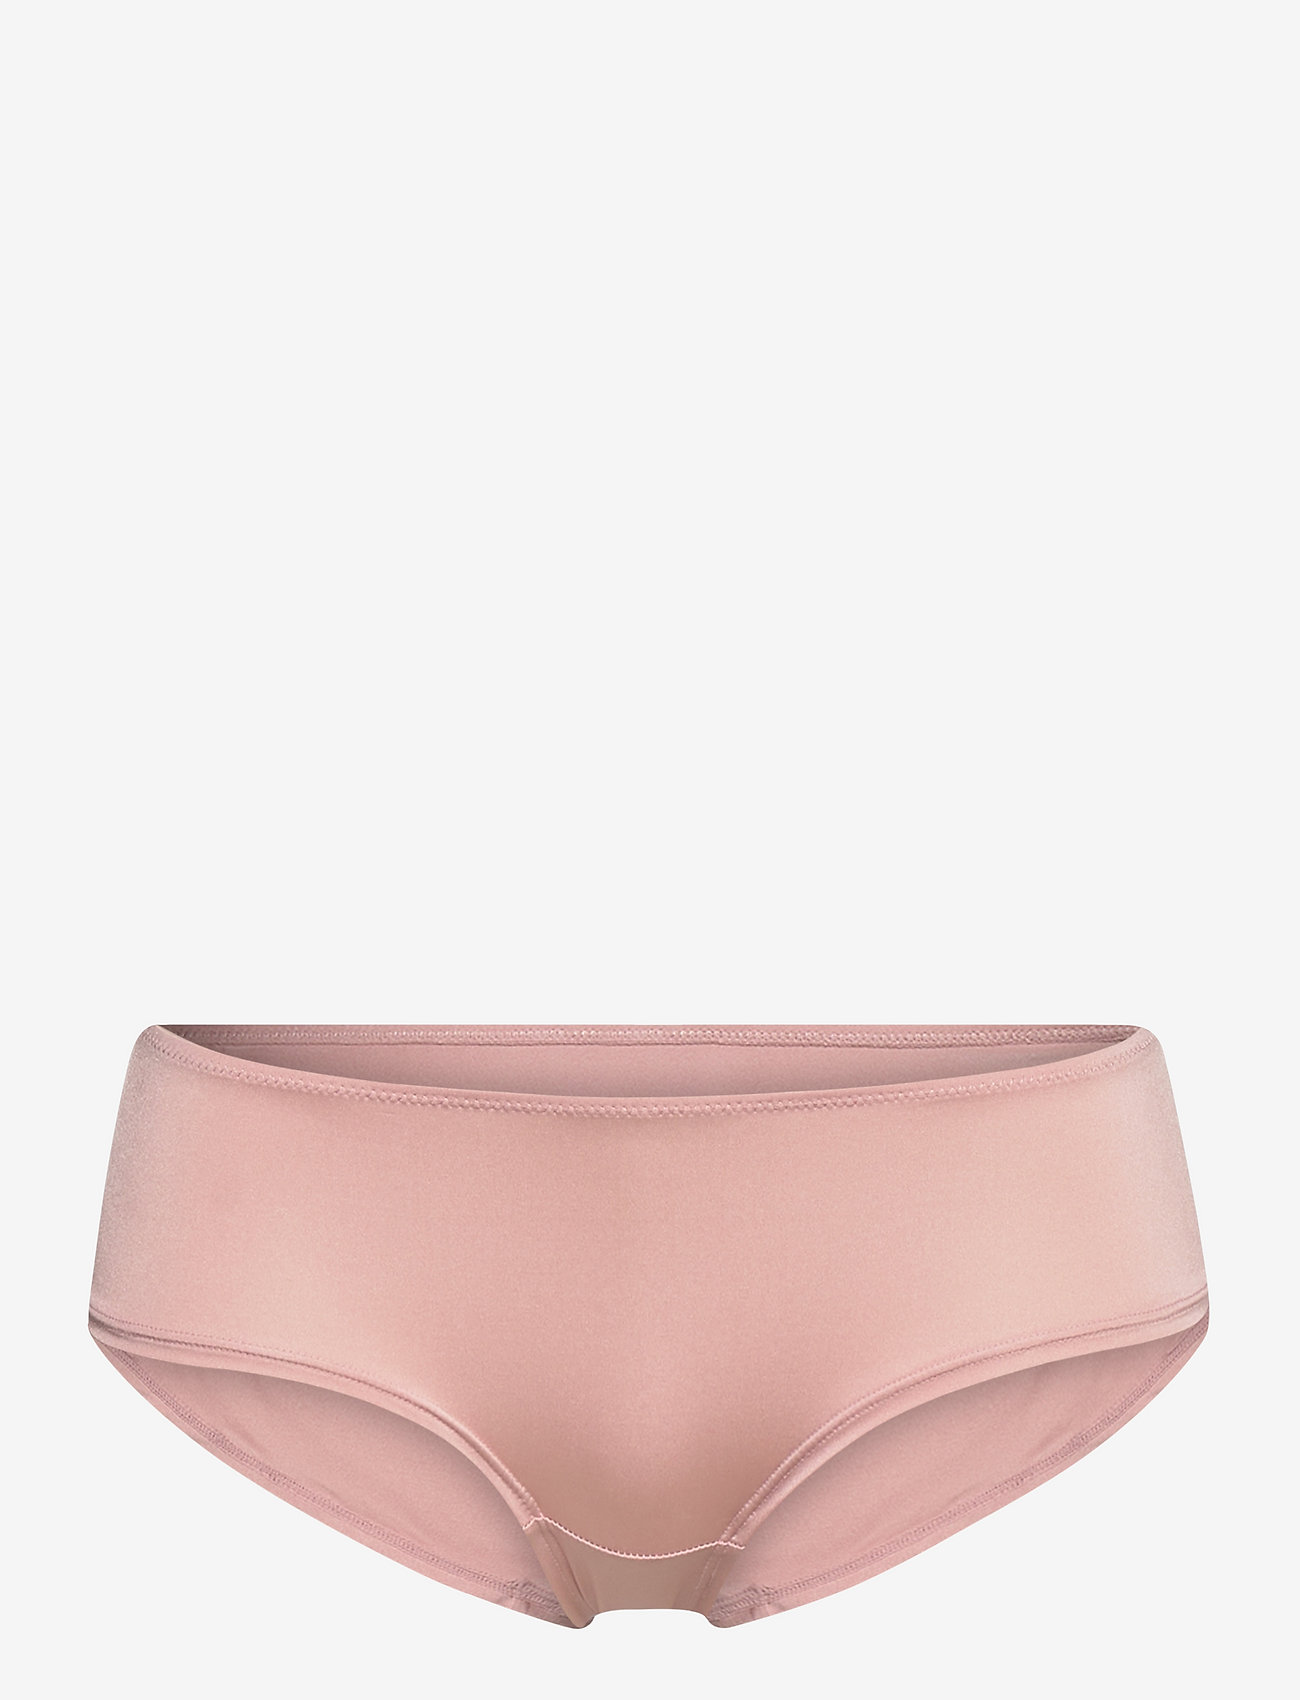 Esprit Bodywear Women - Recycled: microfibre hipster shorts - lowest prices - old pink - 0